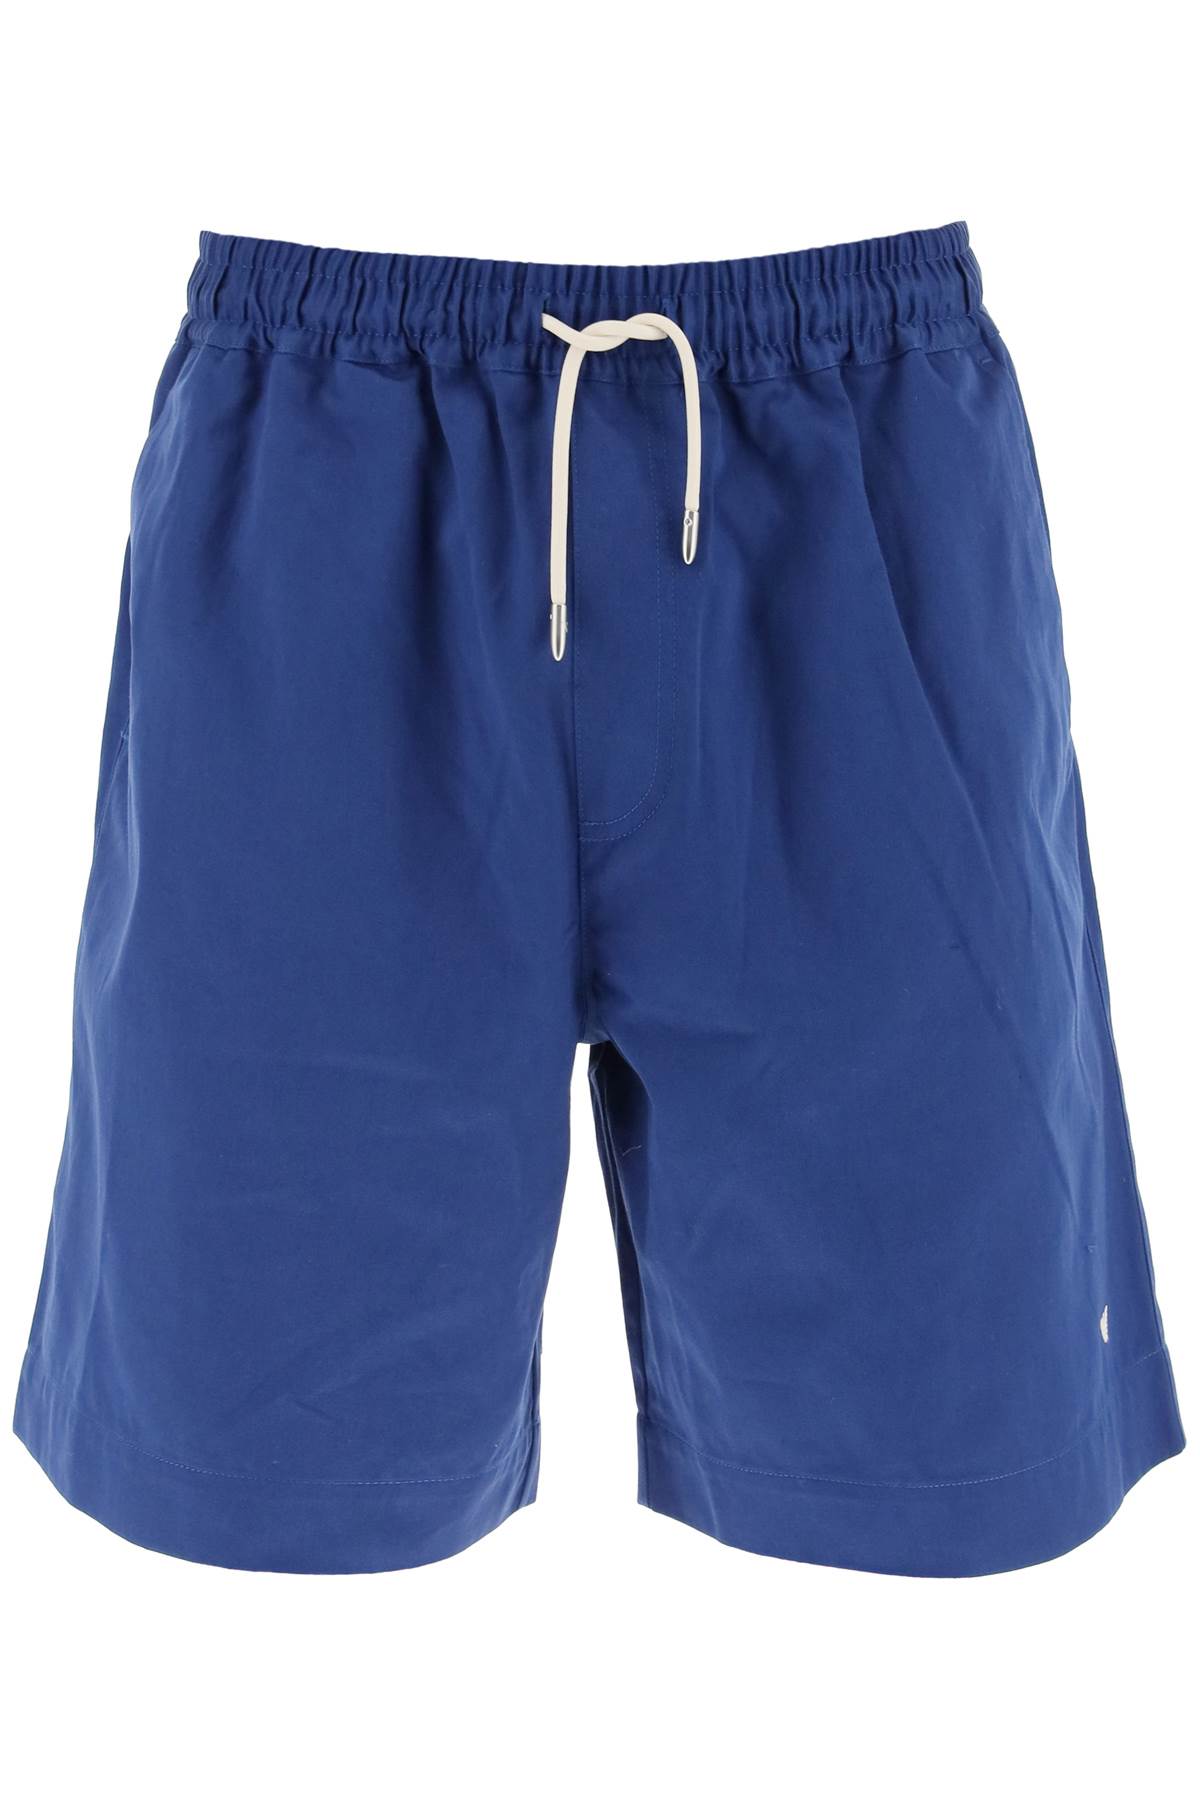 EMPORIO ARMANI RELAXED FIT COTTON SHORTS